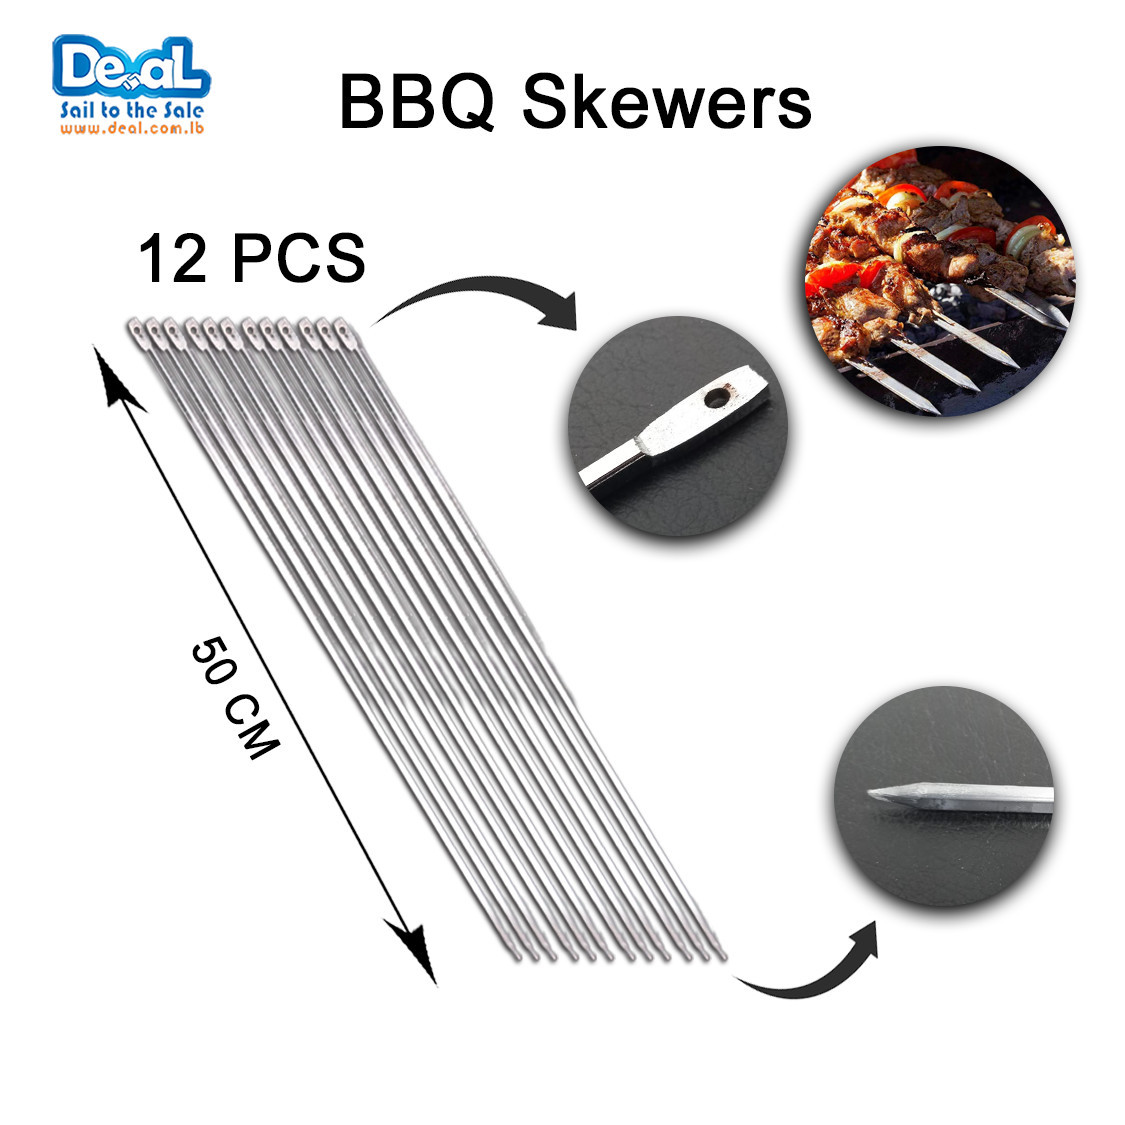 12Pcs High Quality Stainless Steel BBQ Skewers